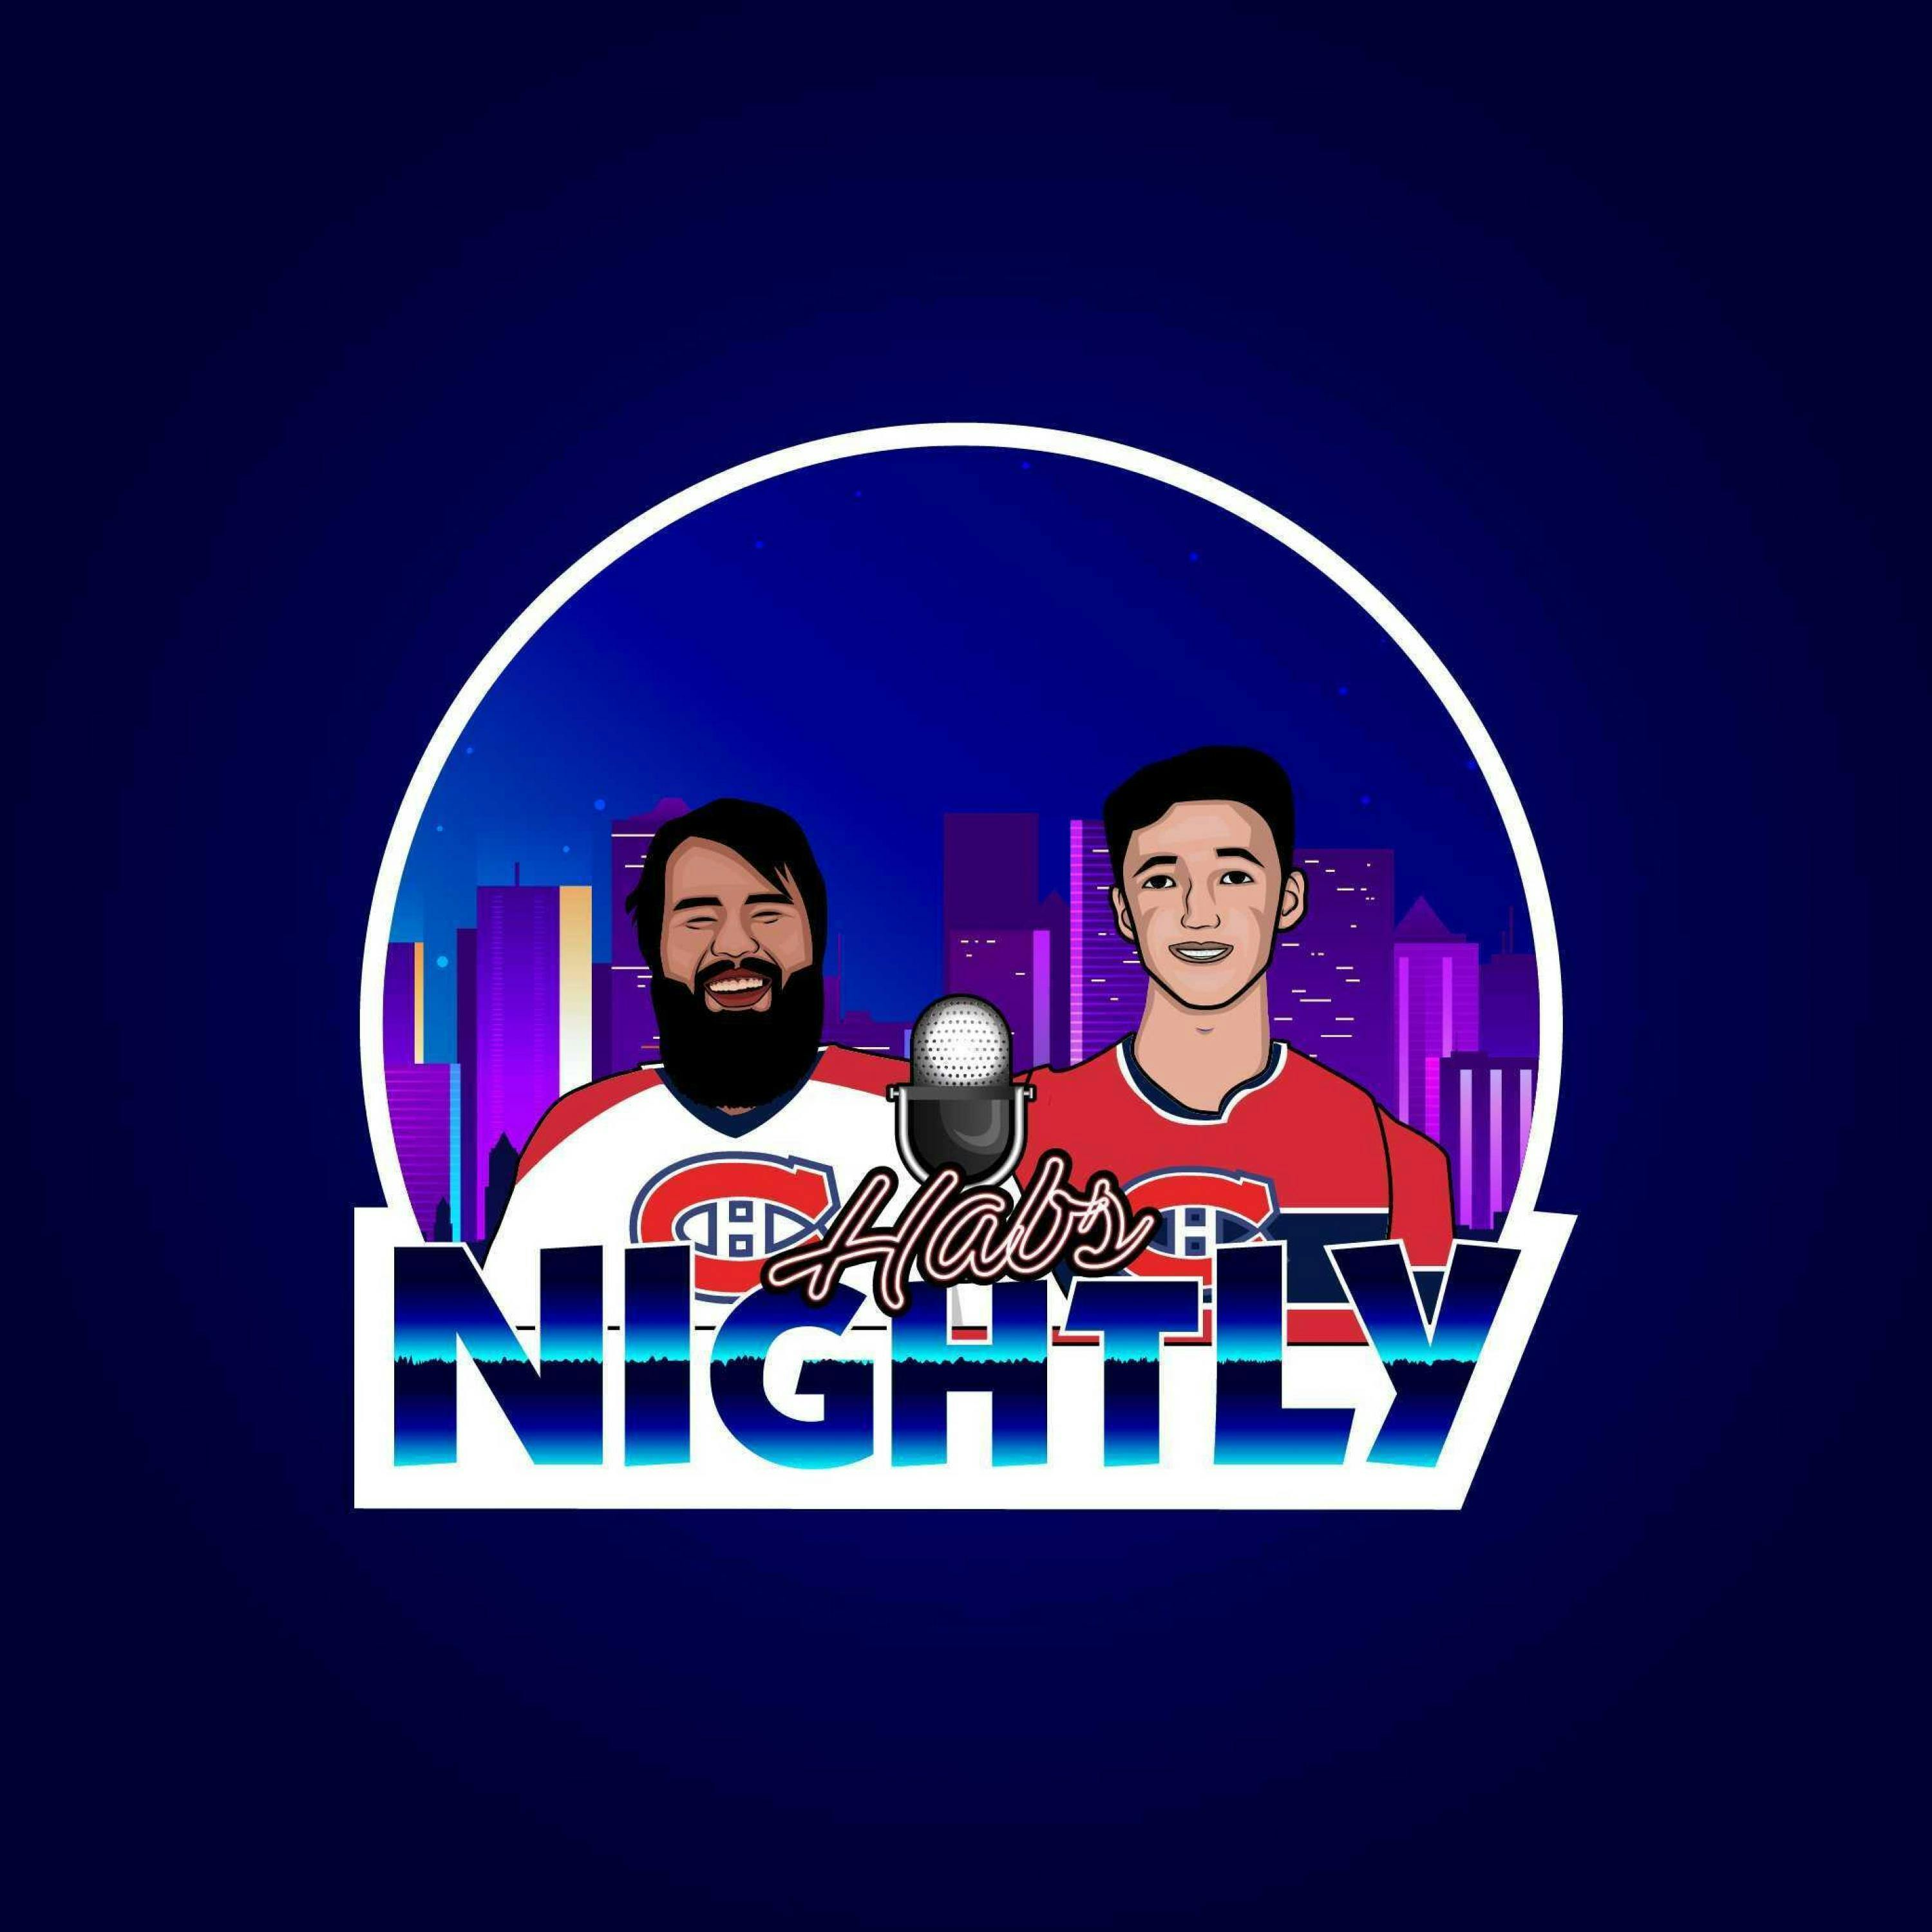 Montreal Canadiens - Habs Nightly - EP 51 - S1